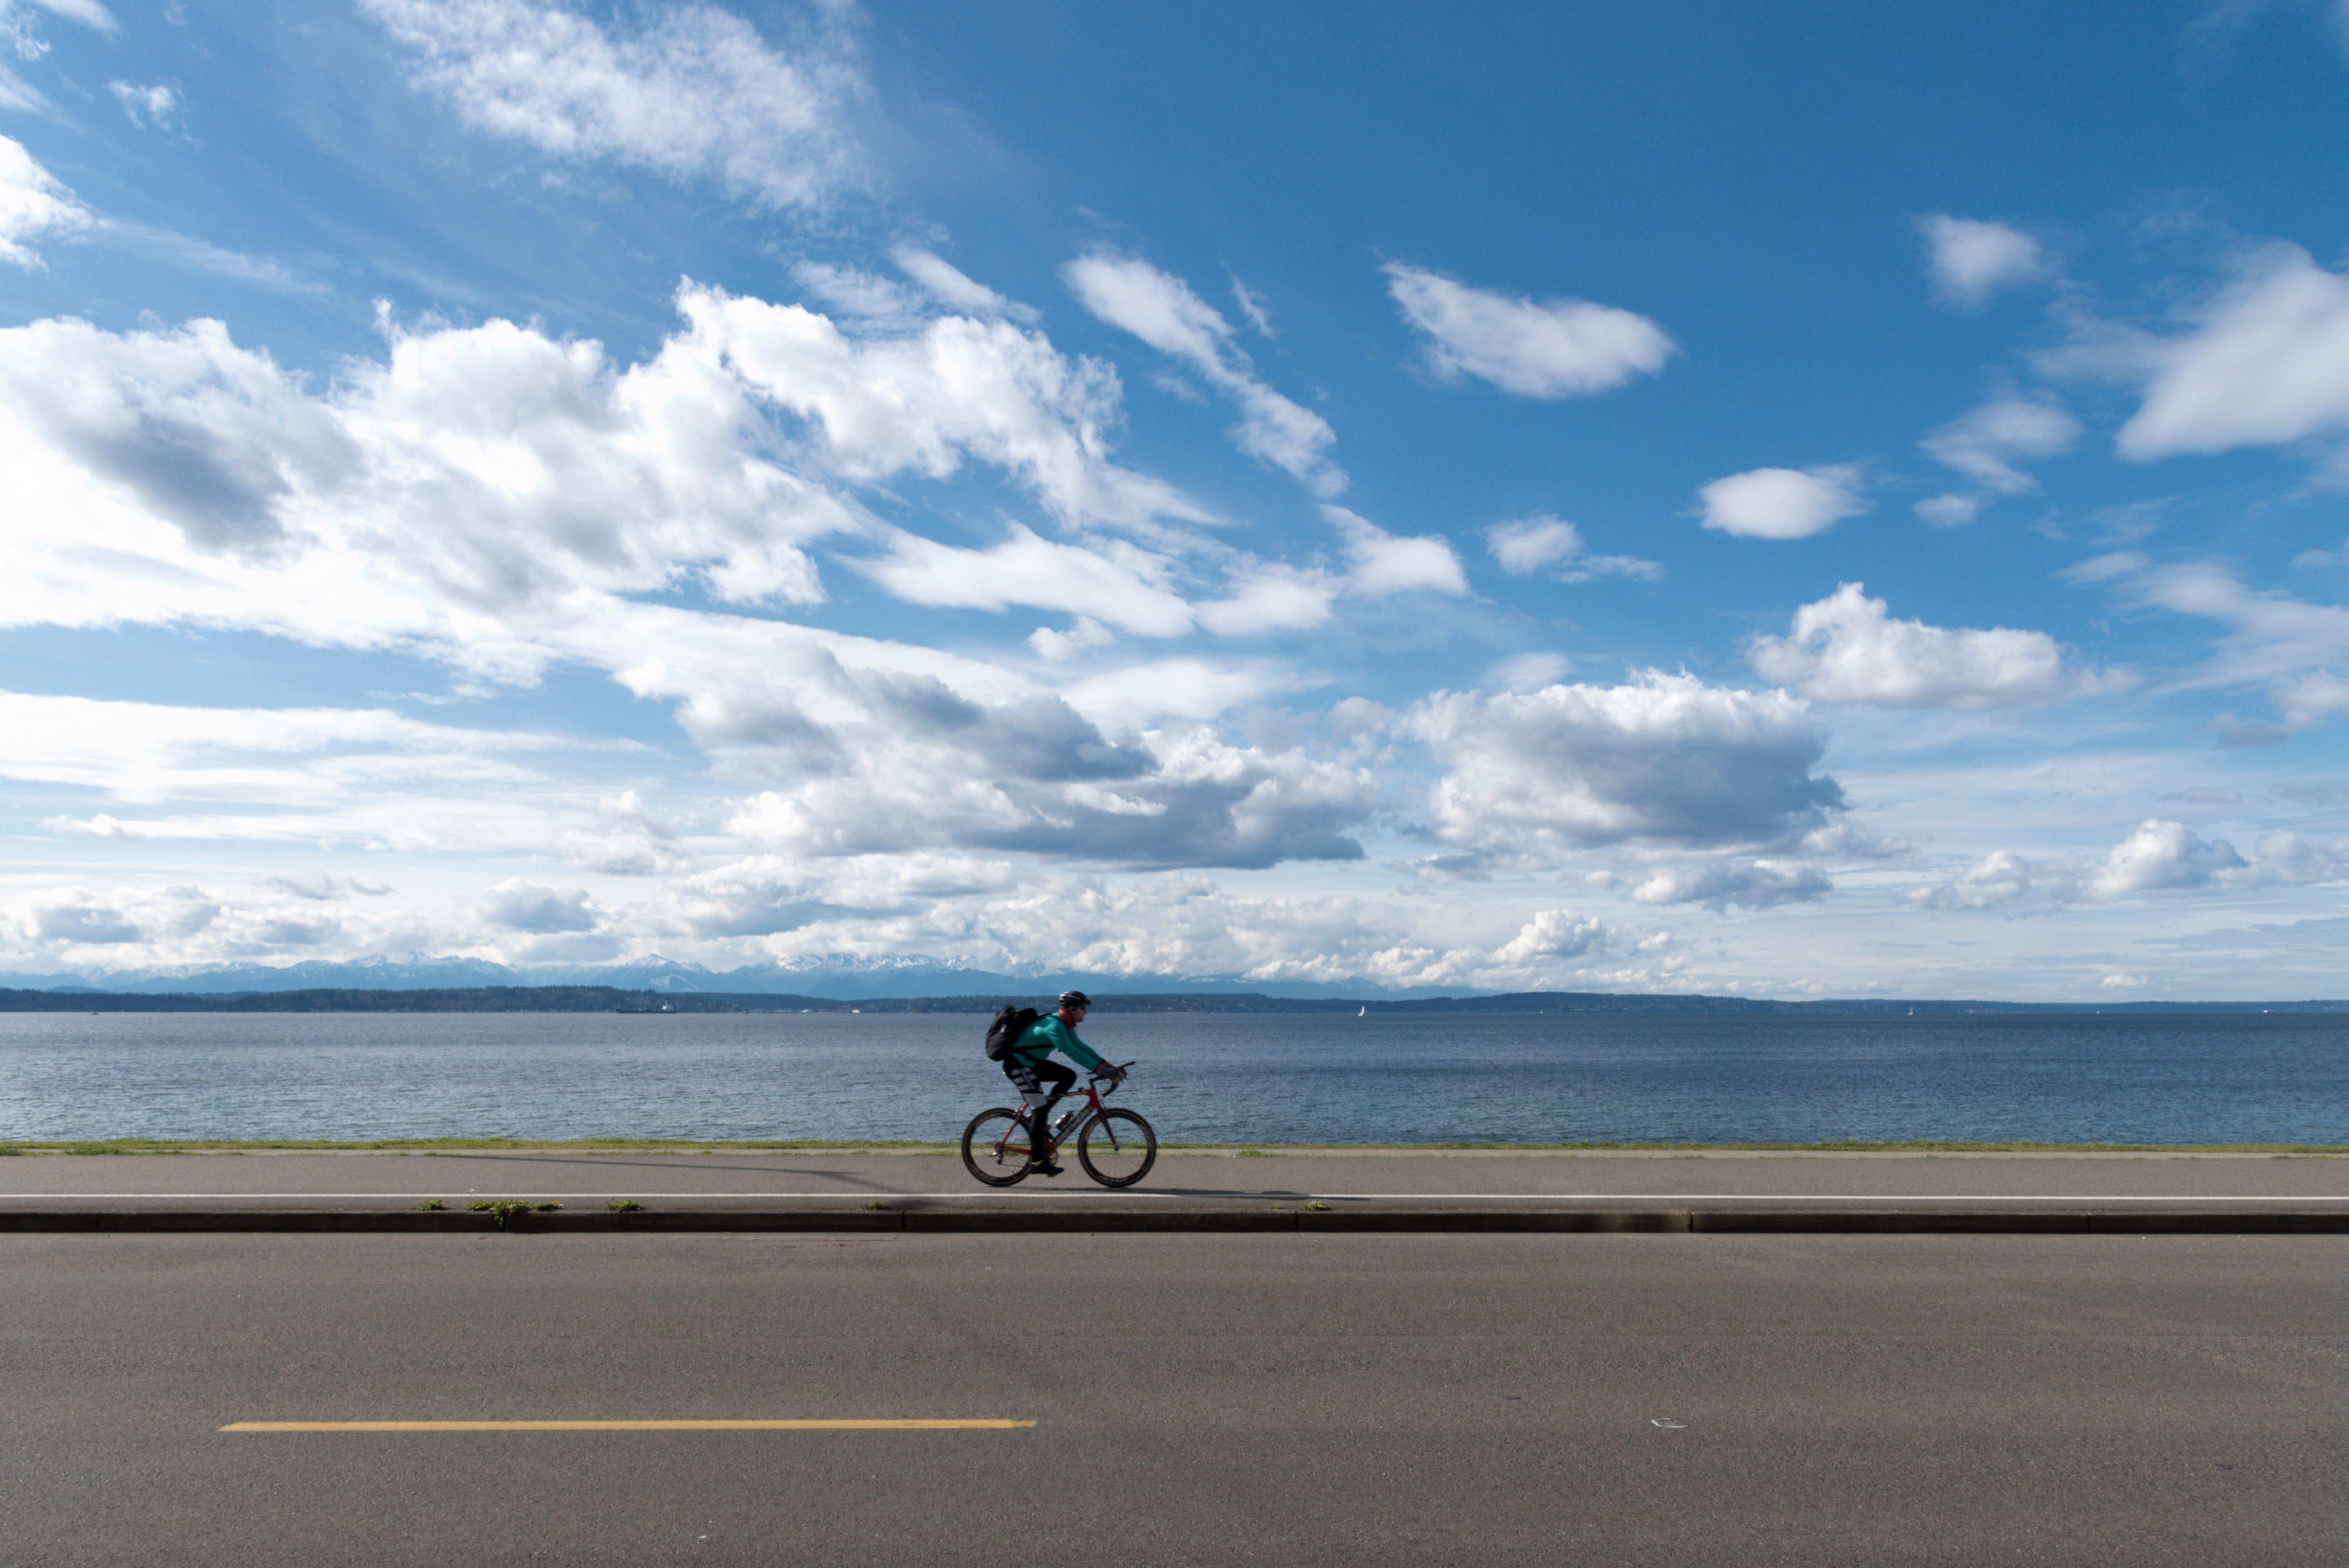 In the foreground is a highway with a bike lane. There is a person riding a bicycle in the bike lane. In the distance is a body of water and a sky with many white clouds. 